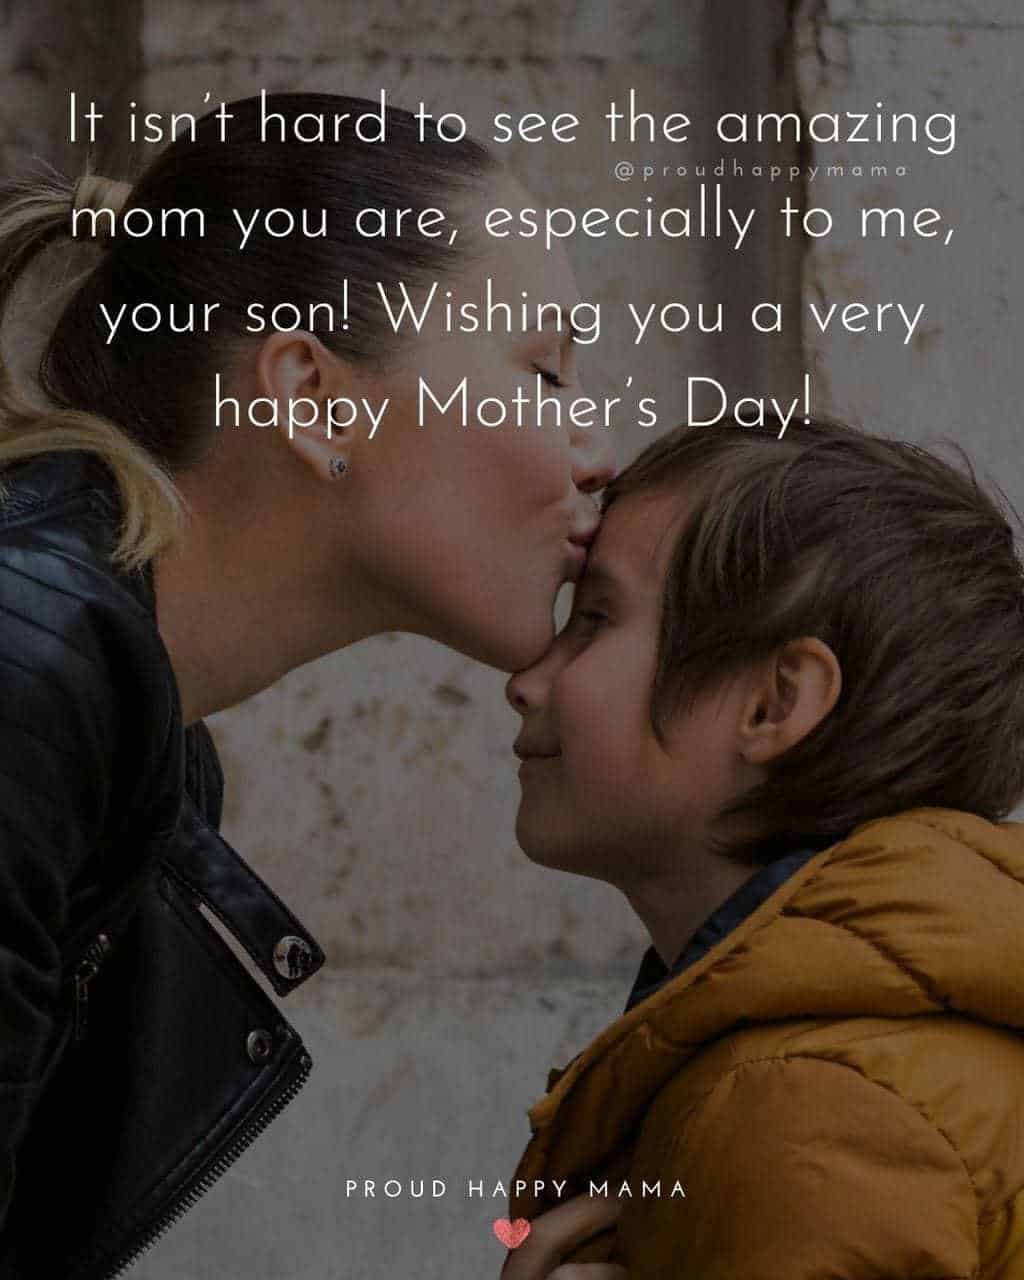 Happy Mothers Day Quotes From Son - It isn’t hard to see the amazing mom you are, especially to me, your son! Wishing you a